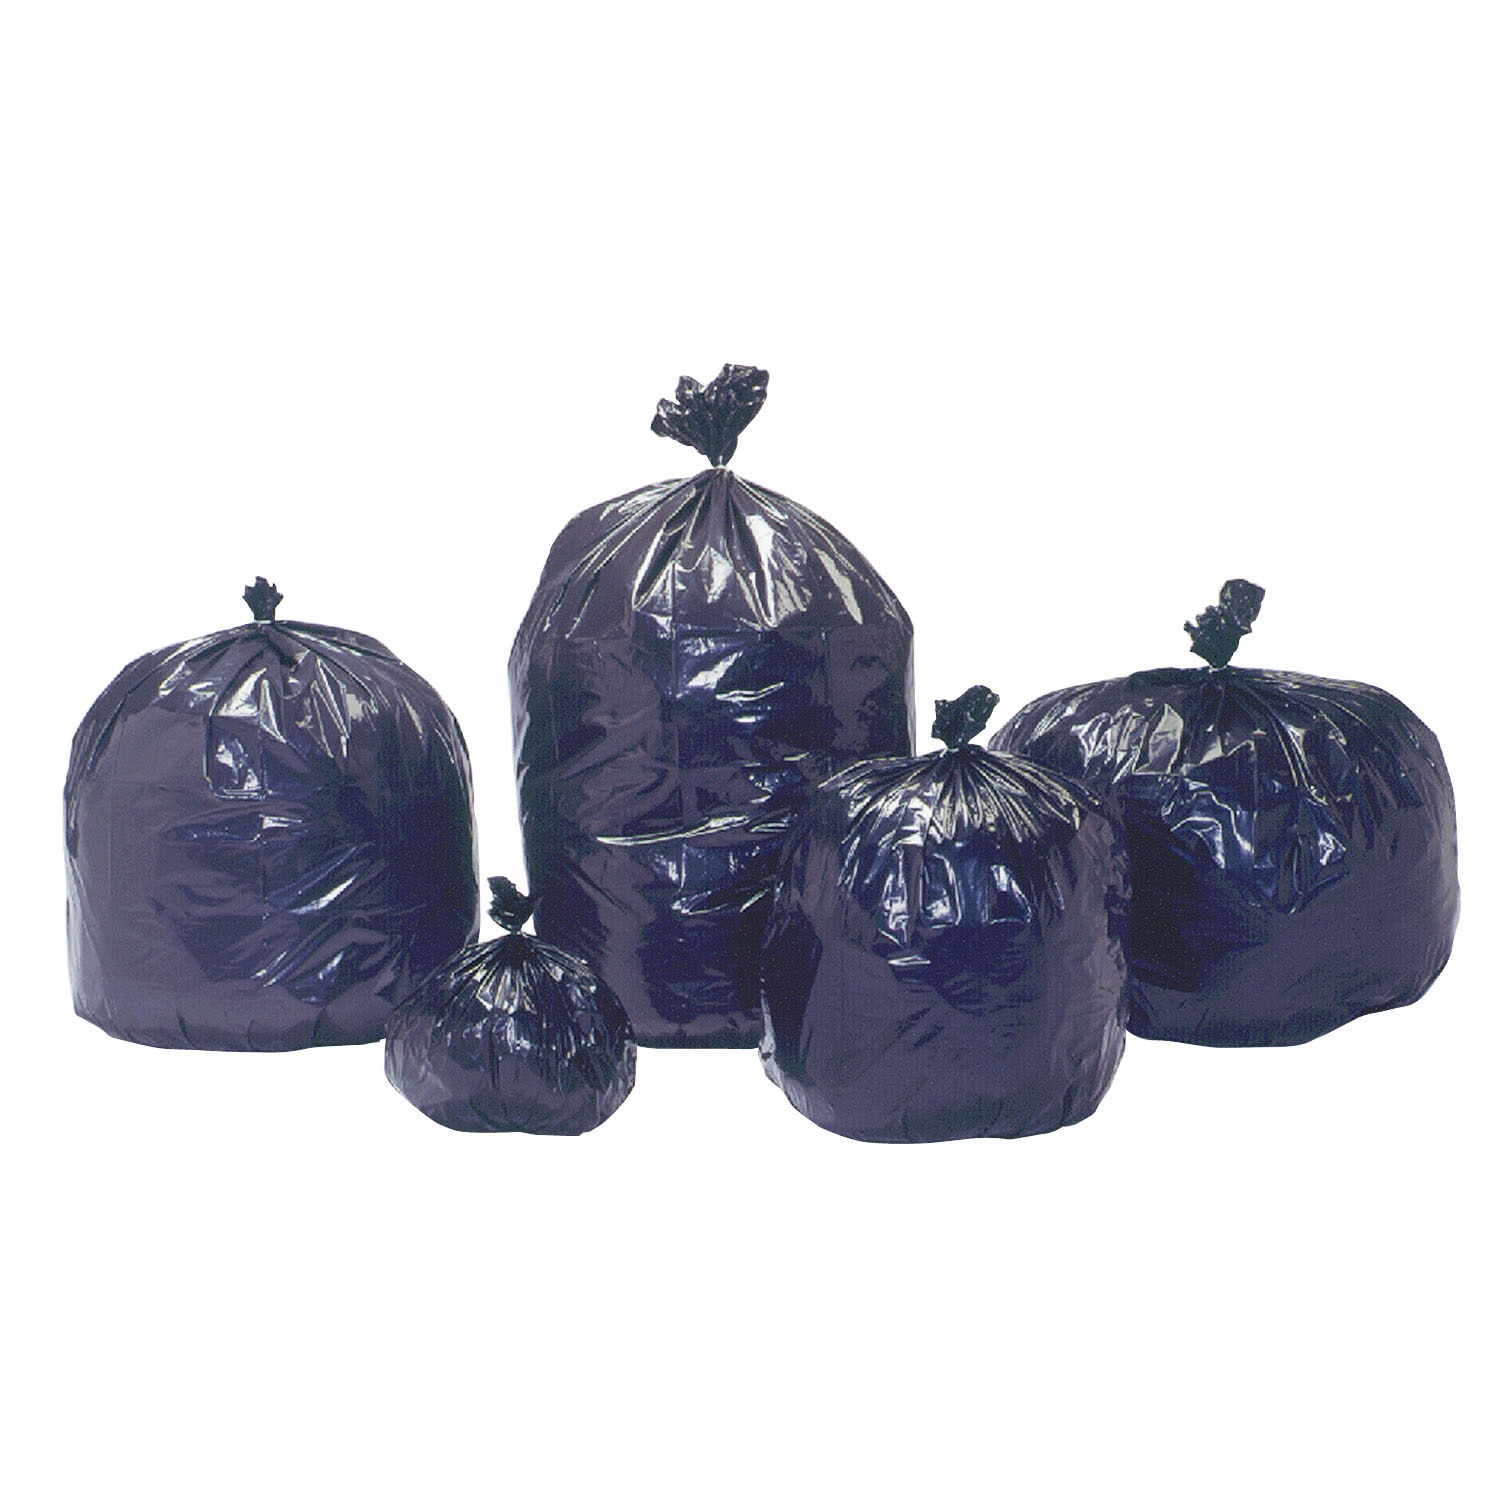 Bag, Trash, Recycled Content, 24" x 24", 7-10 Gal., Heavy Duty, Black/Brown